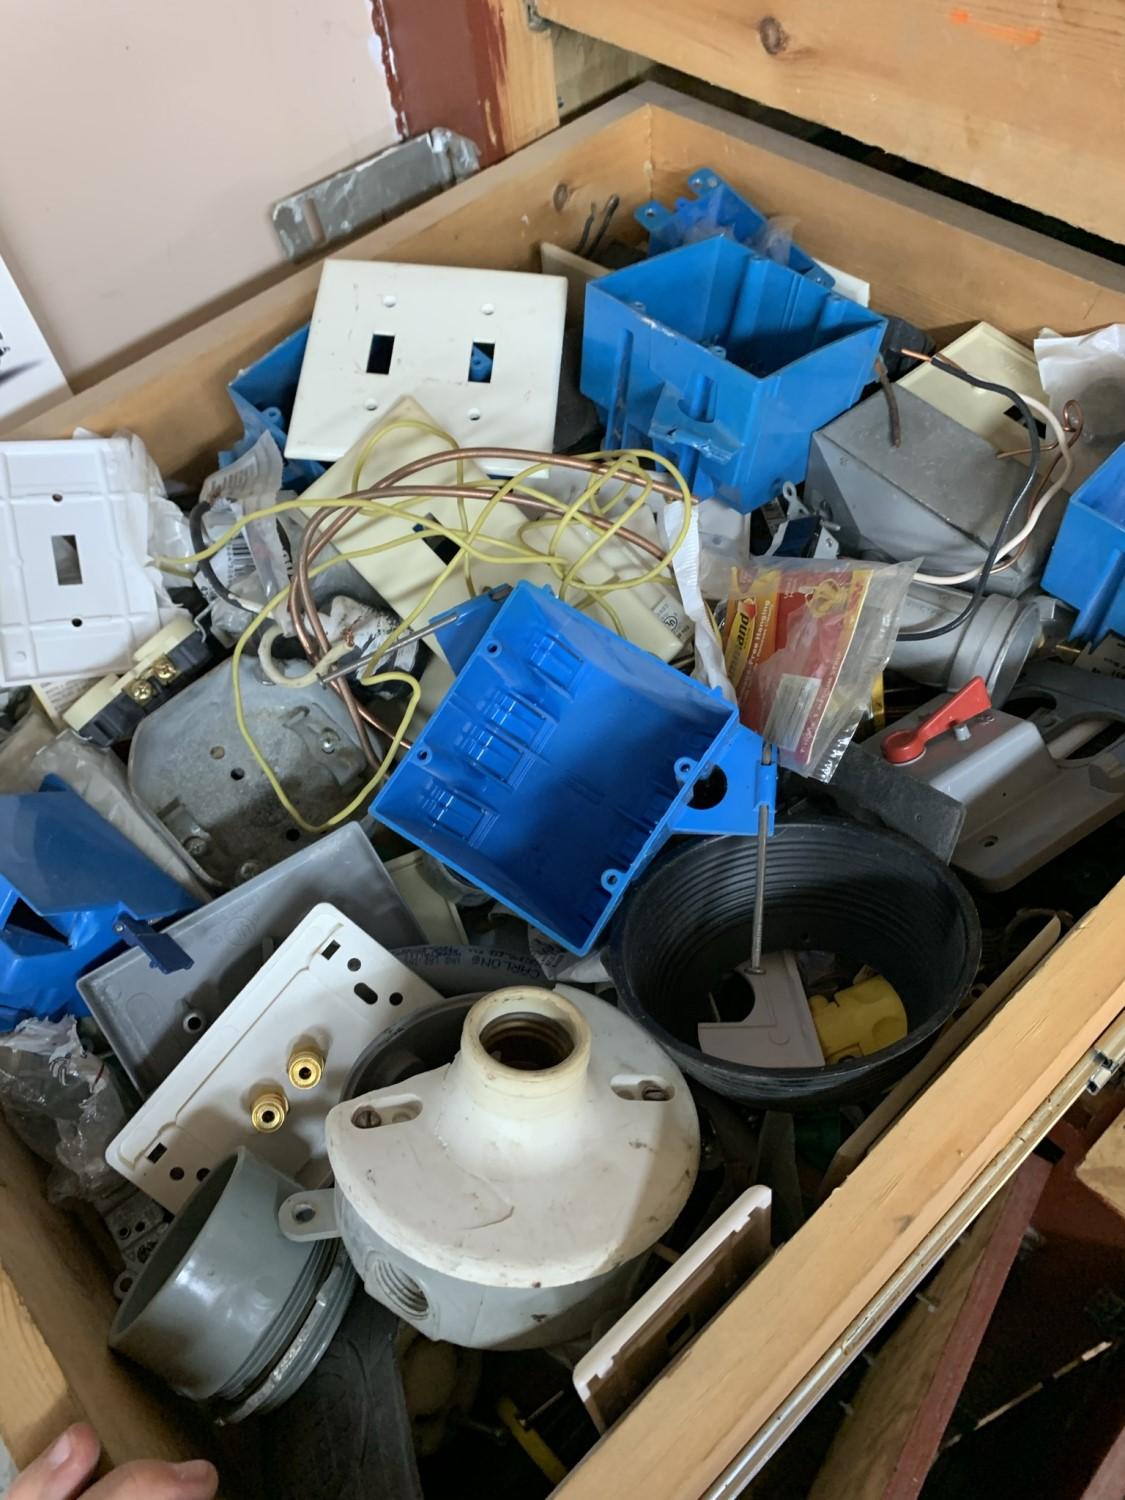 Clean out Garage Closet Shelves - Speaker Wire, Sand Paper, Cable Connectors, Plumbing Items & More